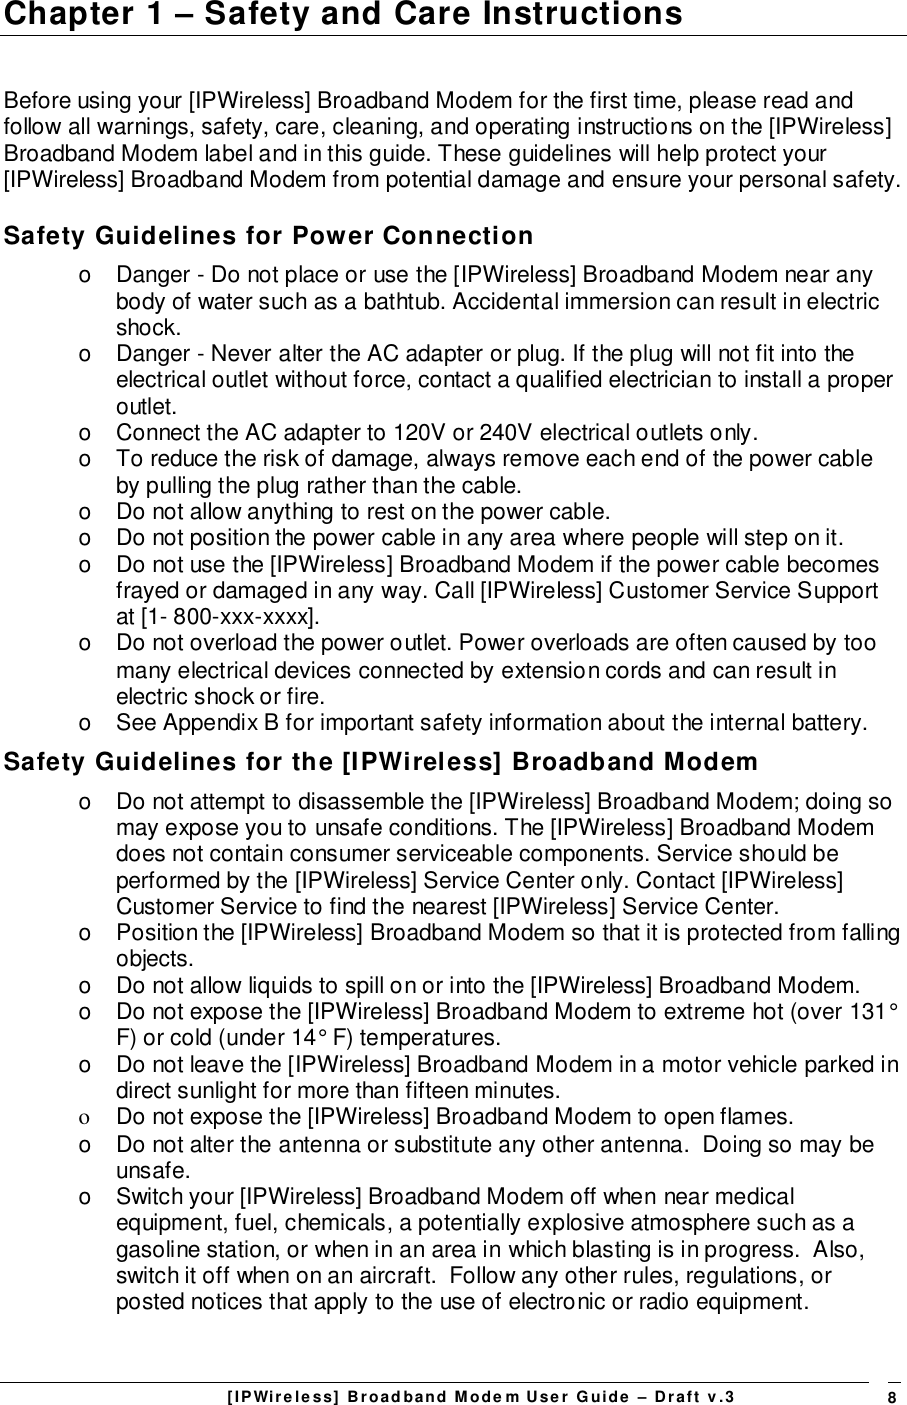 [IPWireless] Broadband Modem User Guide – Draft v.3 8Chapter 1 – Safety and Care InstructionsBefore using your [IPWireless] Broadband Modem for the first time, please read andfollow all warnings, safety, care, cleaning, and operating instructions on the [IPWireless]Broadband Modem label and in this guide. These guidelines will help protect your[IPWireless] Broadband Modem from potential damage and ensure your personal safety.Safety Guidelines for Power Connectiono  Danger - Do not place or use the [IPWireless] Broadband Modem near anybody of water such as a bathtub. Accidental immersion can result in electricshock.o  Danger - Never alter the AC adapter or plug. If the plug will not fit into theelectrical outlet without force, contact a qualified electrician to install a properoutlet.o  Connect the AC adapter to 120V or 240V electrical outlets only.o  To reduce the risk of damage, always remove each end of the power cableby pulling the plug rather than the cable.o  Do not allow anything to rest on the power cable.o  Do not position the power cable in any area where people will step on it.o  Do not use the [IPWireless] Broadband Modem if the power cable becomesfrayed or damaged in any way. Call [IPWireless] Customer Service Supportat [1- 800-xxx-xxxx].o  Do not overload the power outlet. Power overloads are often caused by toomany electrical devices connected by extension cords and can result inelectric shock or fire.o  See Appendix B for important safety information about the internal battery.Safety Guidelines for the [IPWireless] Broadband Modemo  Do not attempt to disassemble the [IPWireless] Broadband Modem; doing somay expose you to unsafe conditions. The [IPWireless] Broadband Modemdoes not contain consumer serviceable components. Service should beperformed by the [IPWireless] Service Center only. Contact [IPWireless]Customer Service to find the nearest [IPWireless] Service Center.o  Position the [IPWireless] Broadband Modem so that it is protected from fallingobjects.o  Do not allow liquids to spill on or into the [IPWireless] Broadband Modem.o  Do not expose the [IPWireless] Broadband Modem to extreme hot (over 131°F) or cold (under 14° F) temperatures.o  Do not leave the [IPWireless] Broadband Modem in a motor vehicle parked indirect sunlight for more than fifteen minutes.o  Do not expose the [IPWireless] Broadband Modem to open flames.o  Do not alter the antenna or substitute any other antenna.  Doing so may beunsafe.o  Switch your [IPWireless] Broadband Modem off when near medicalequipment, fuel, chemicals, a potentially explosive atmosphere such as agasoline station, or when in an area in which blasting is in progress.  Also,switch it off when on an aircraft.  Follow any other rules, regulations, orposted notices that apply to the use of electronic or radio equipment.